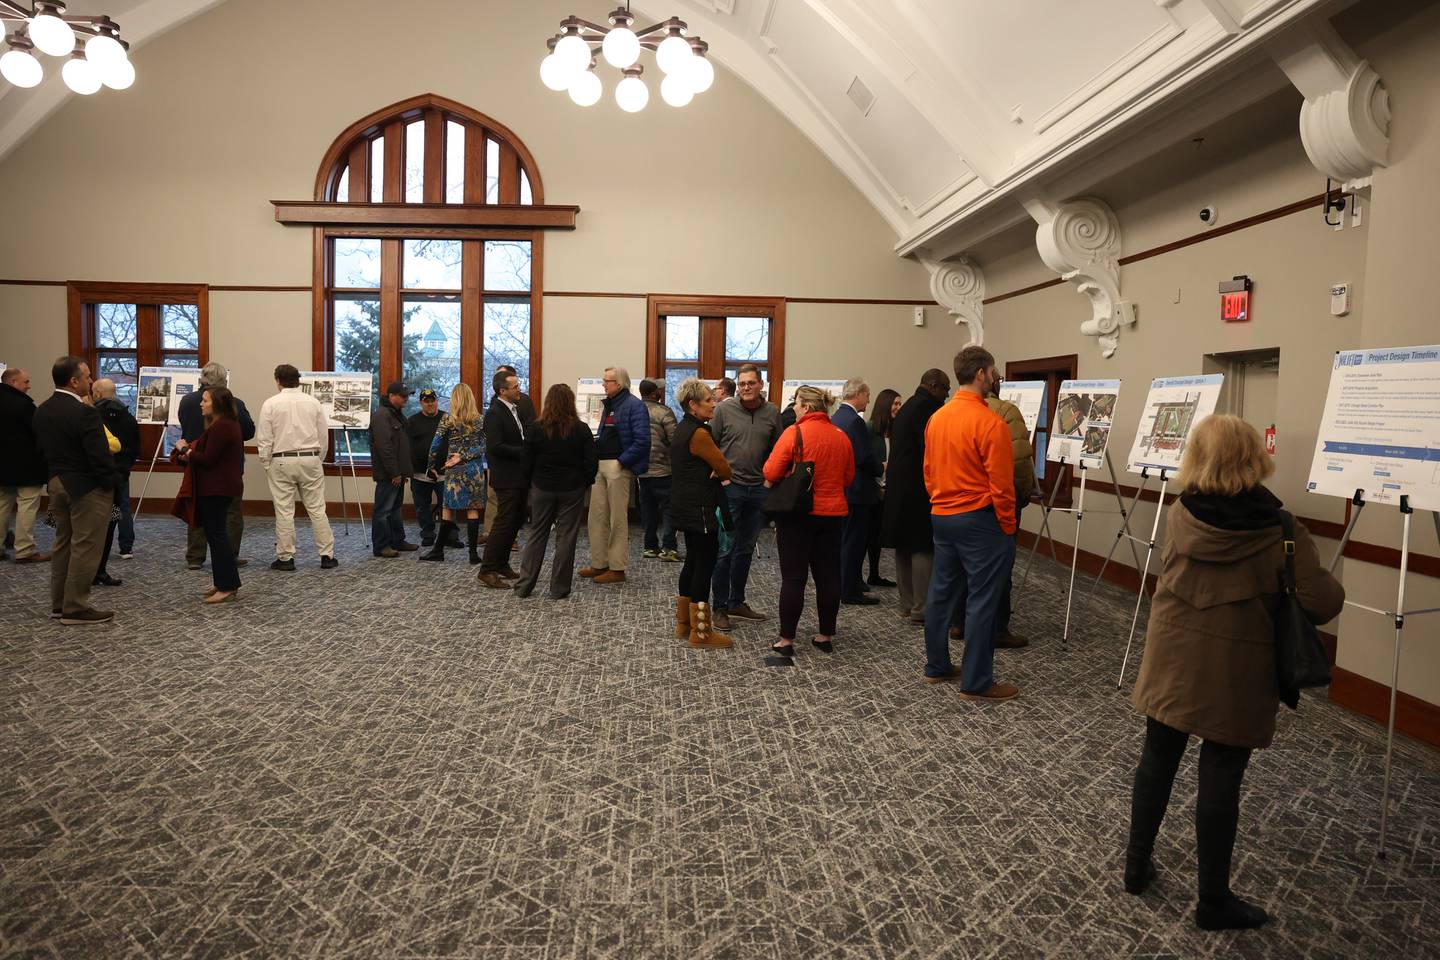 City of Joliet hosted an open house at the Joliet Public Library to hear from the public on the proposed downtown plaza on Thursday, February 23rd, 2023.